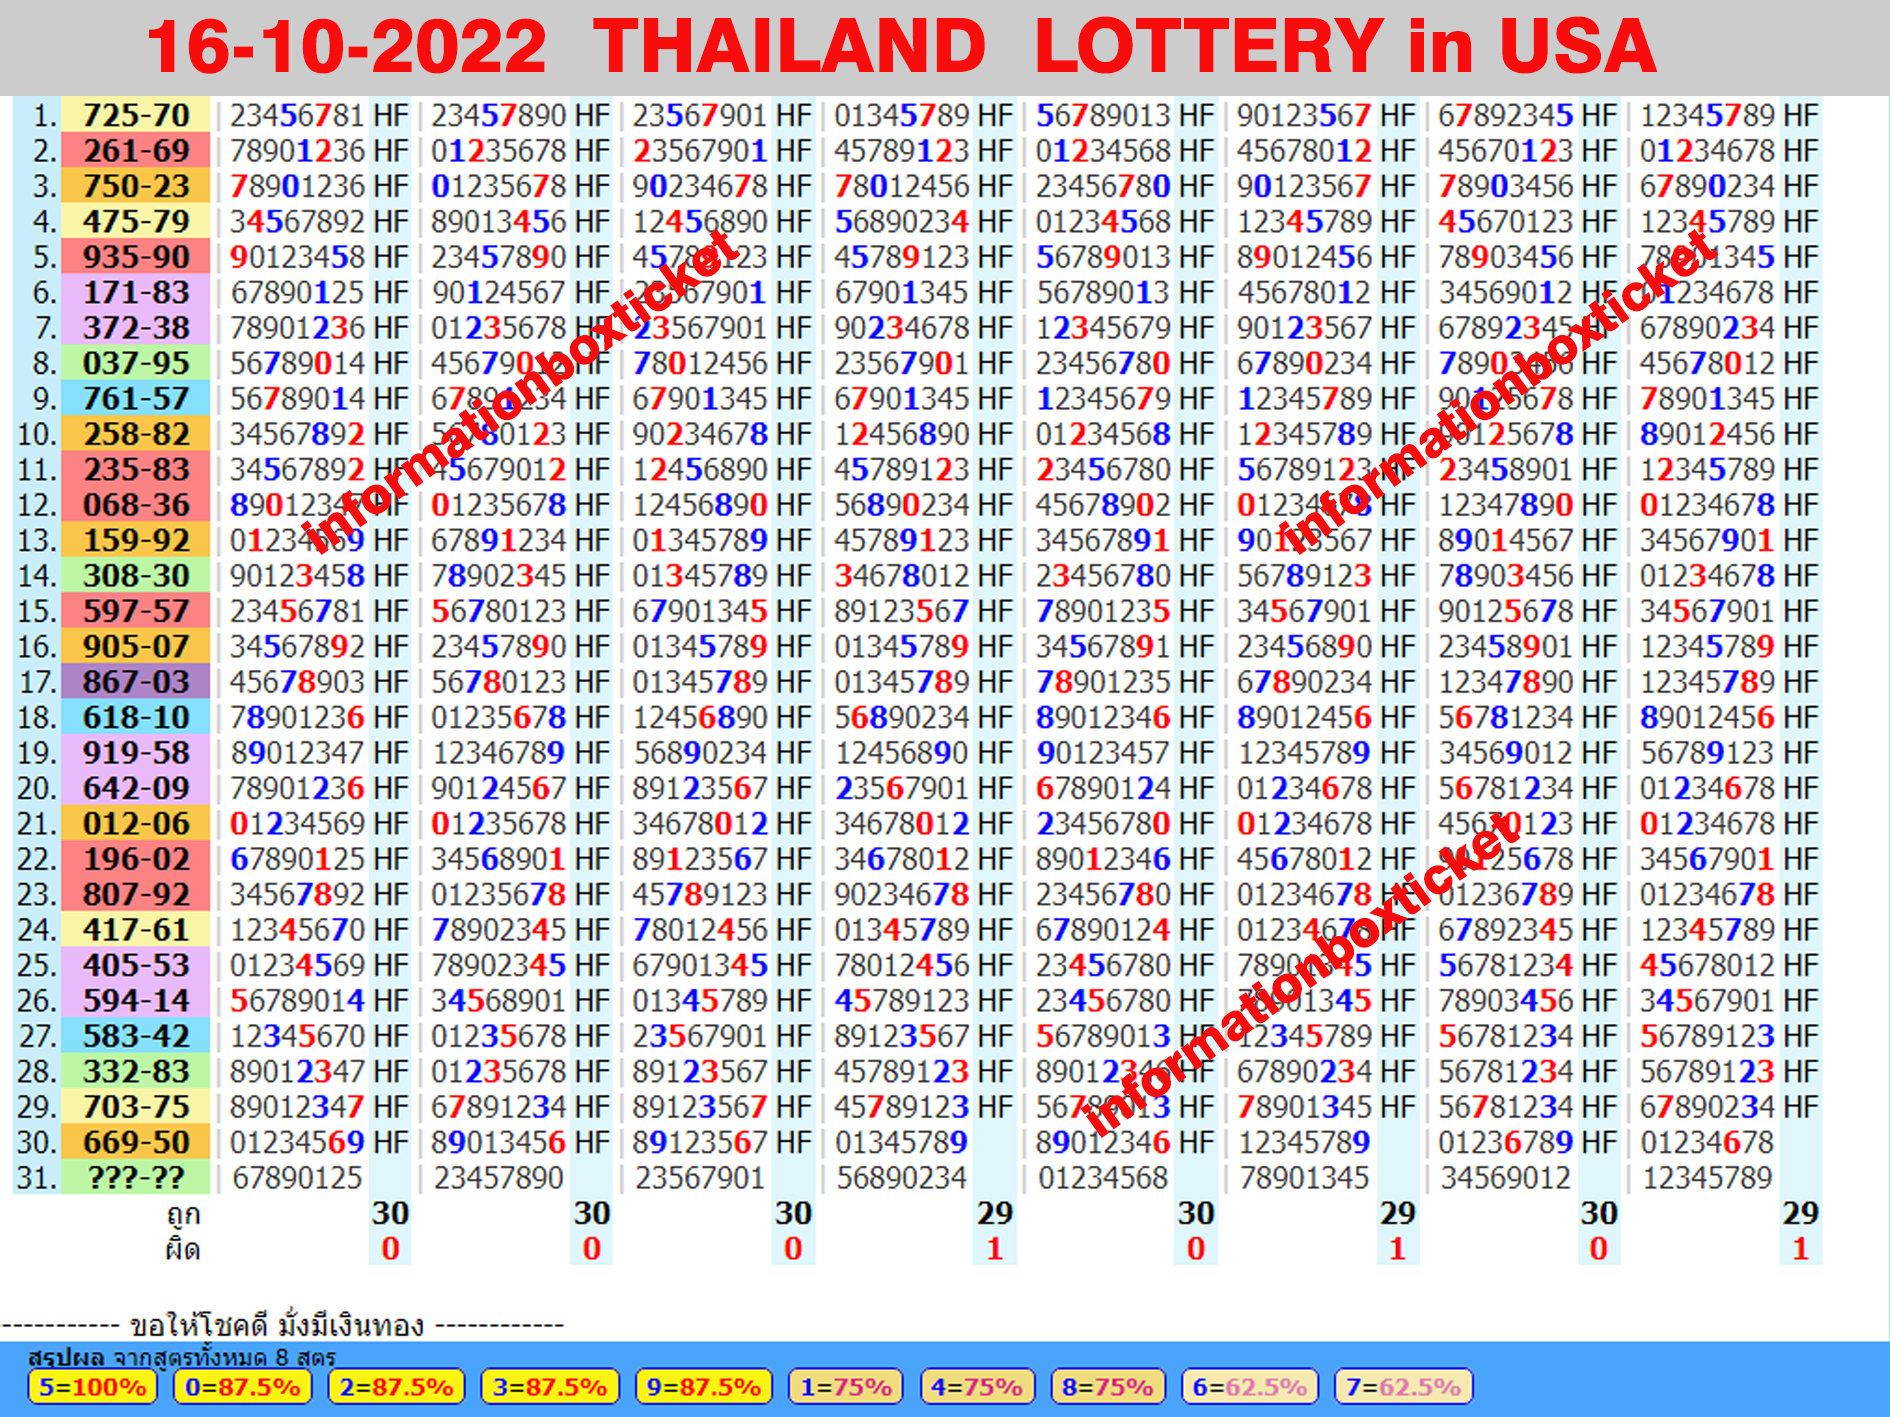 how to play Thai lottery, HF formula  for 16-10-2022